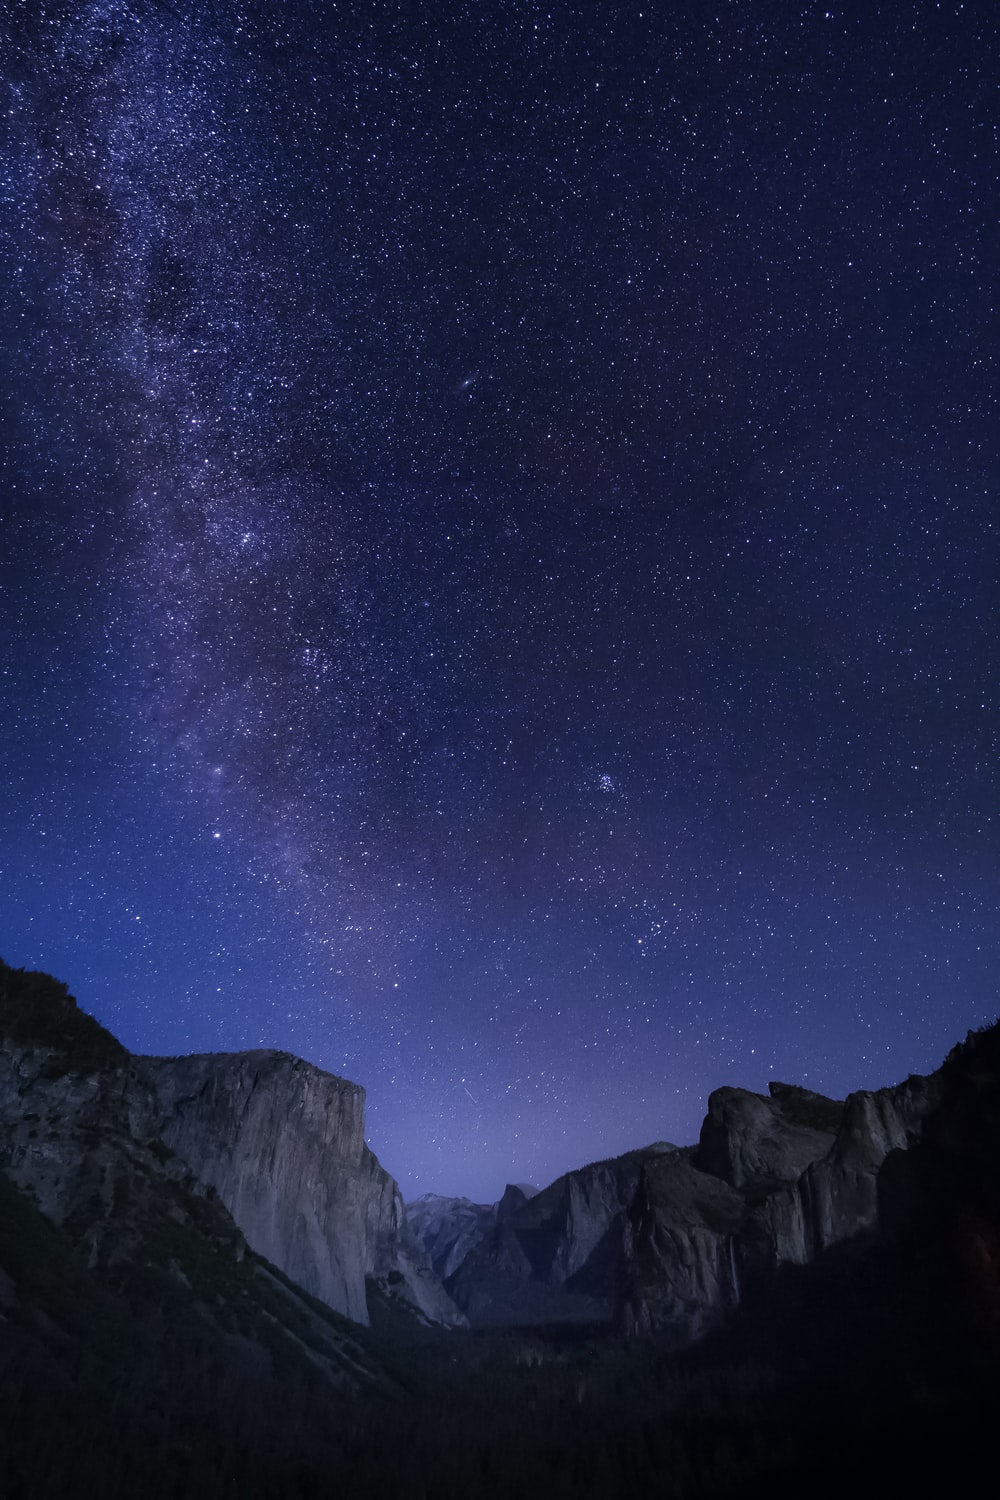 Mountains By Night Picture [Stunning!]. Download Free Image